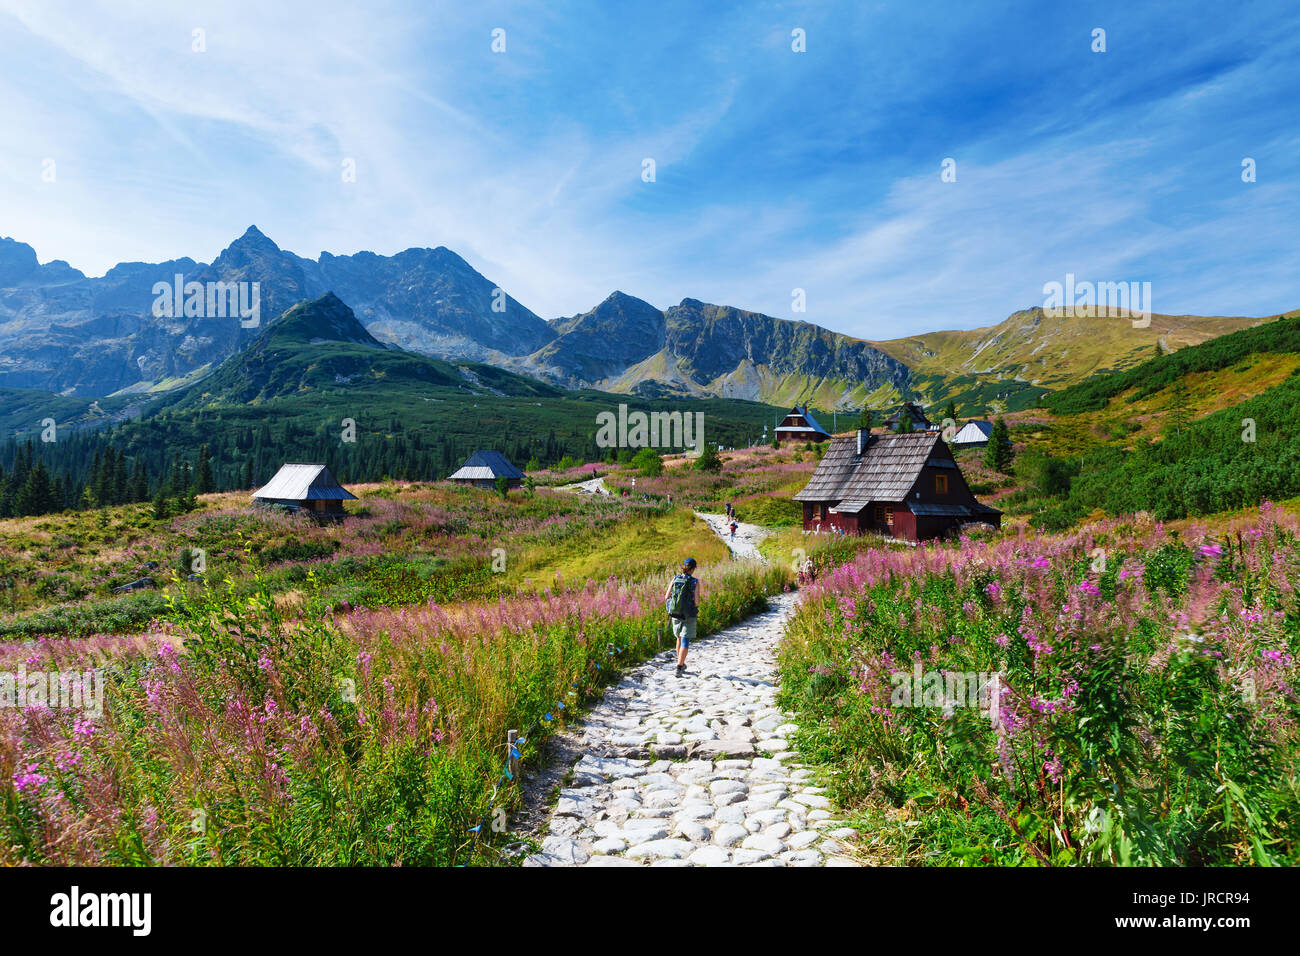 Gasienicowa Valley in Tatry mountains, Poland Stock Photo